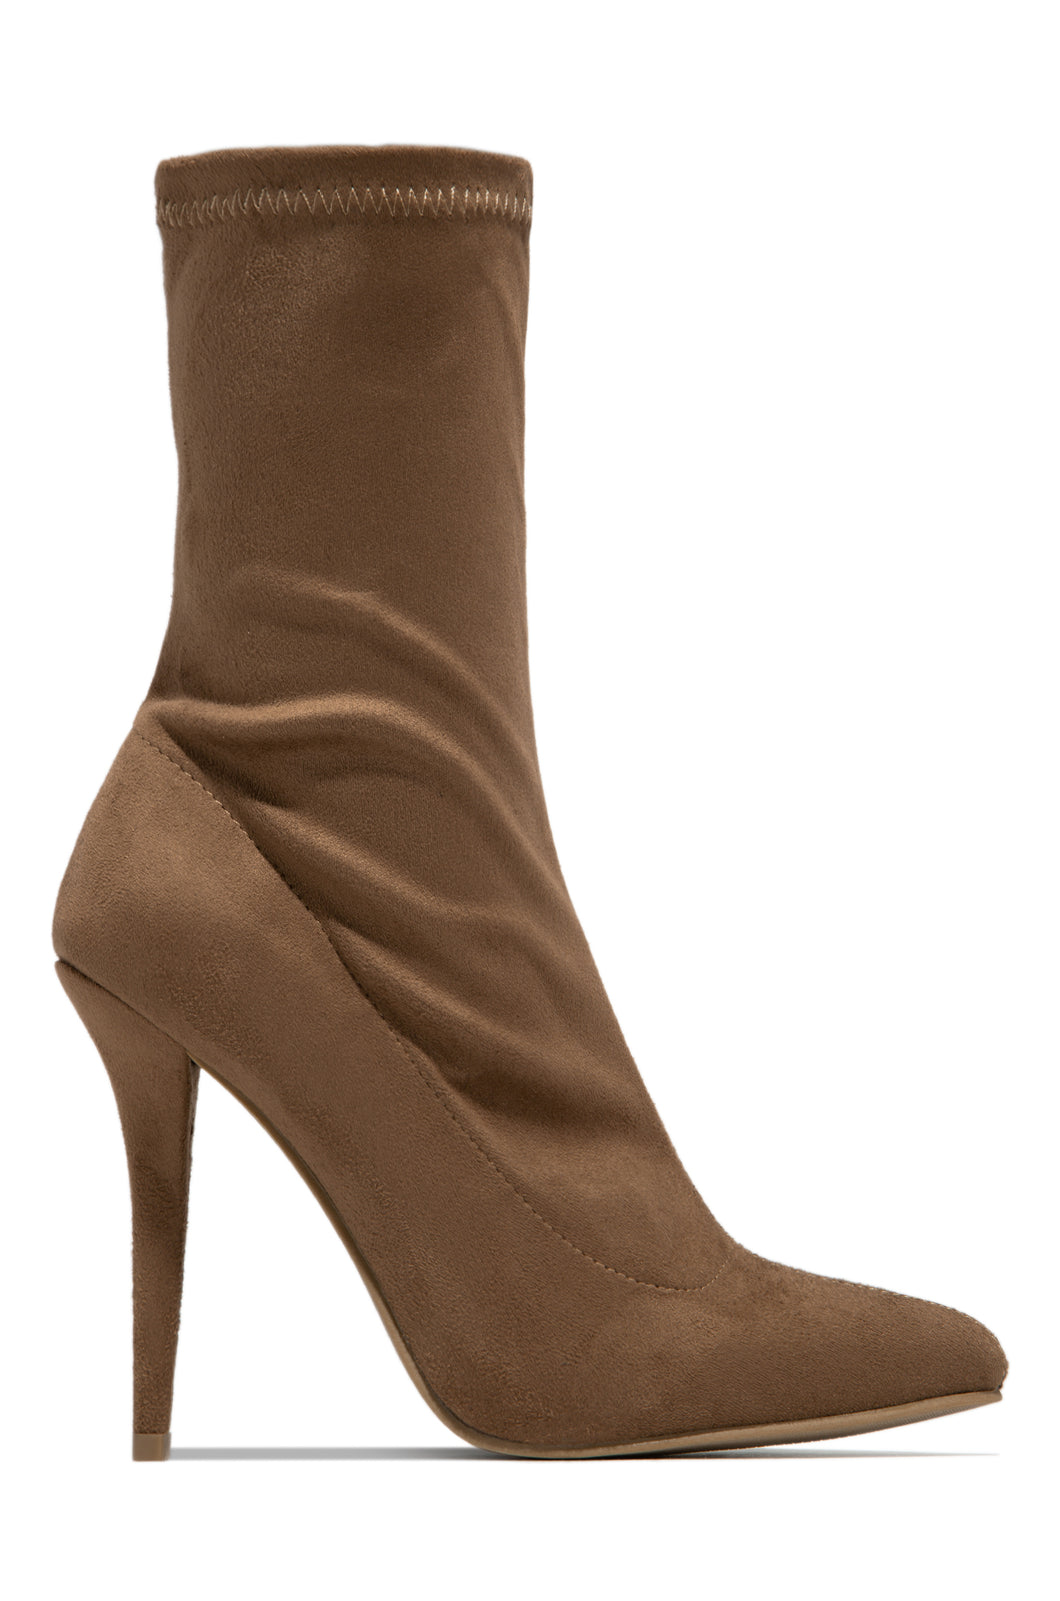 Guilt Trip Heel Ankle Boots - Taupe